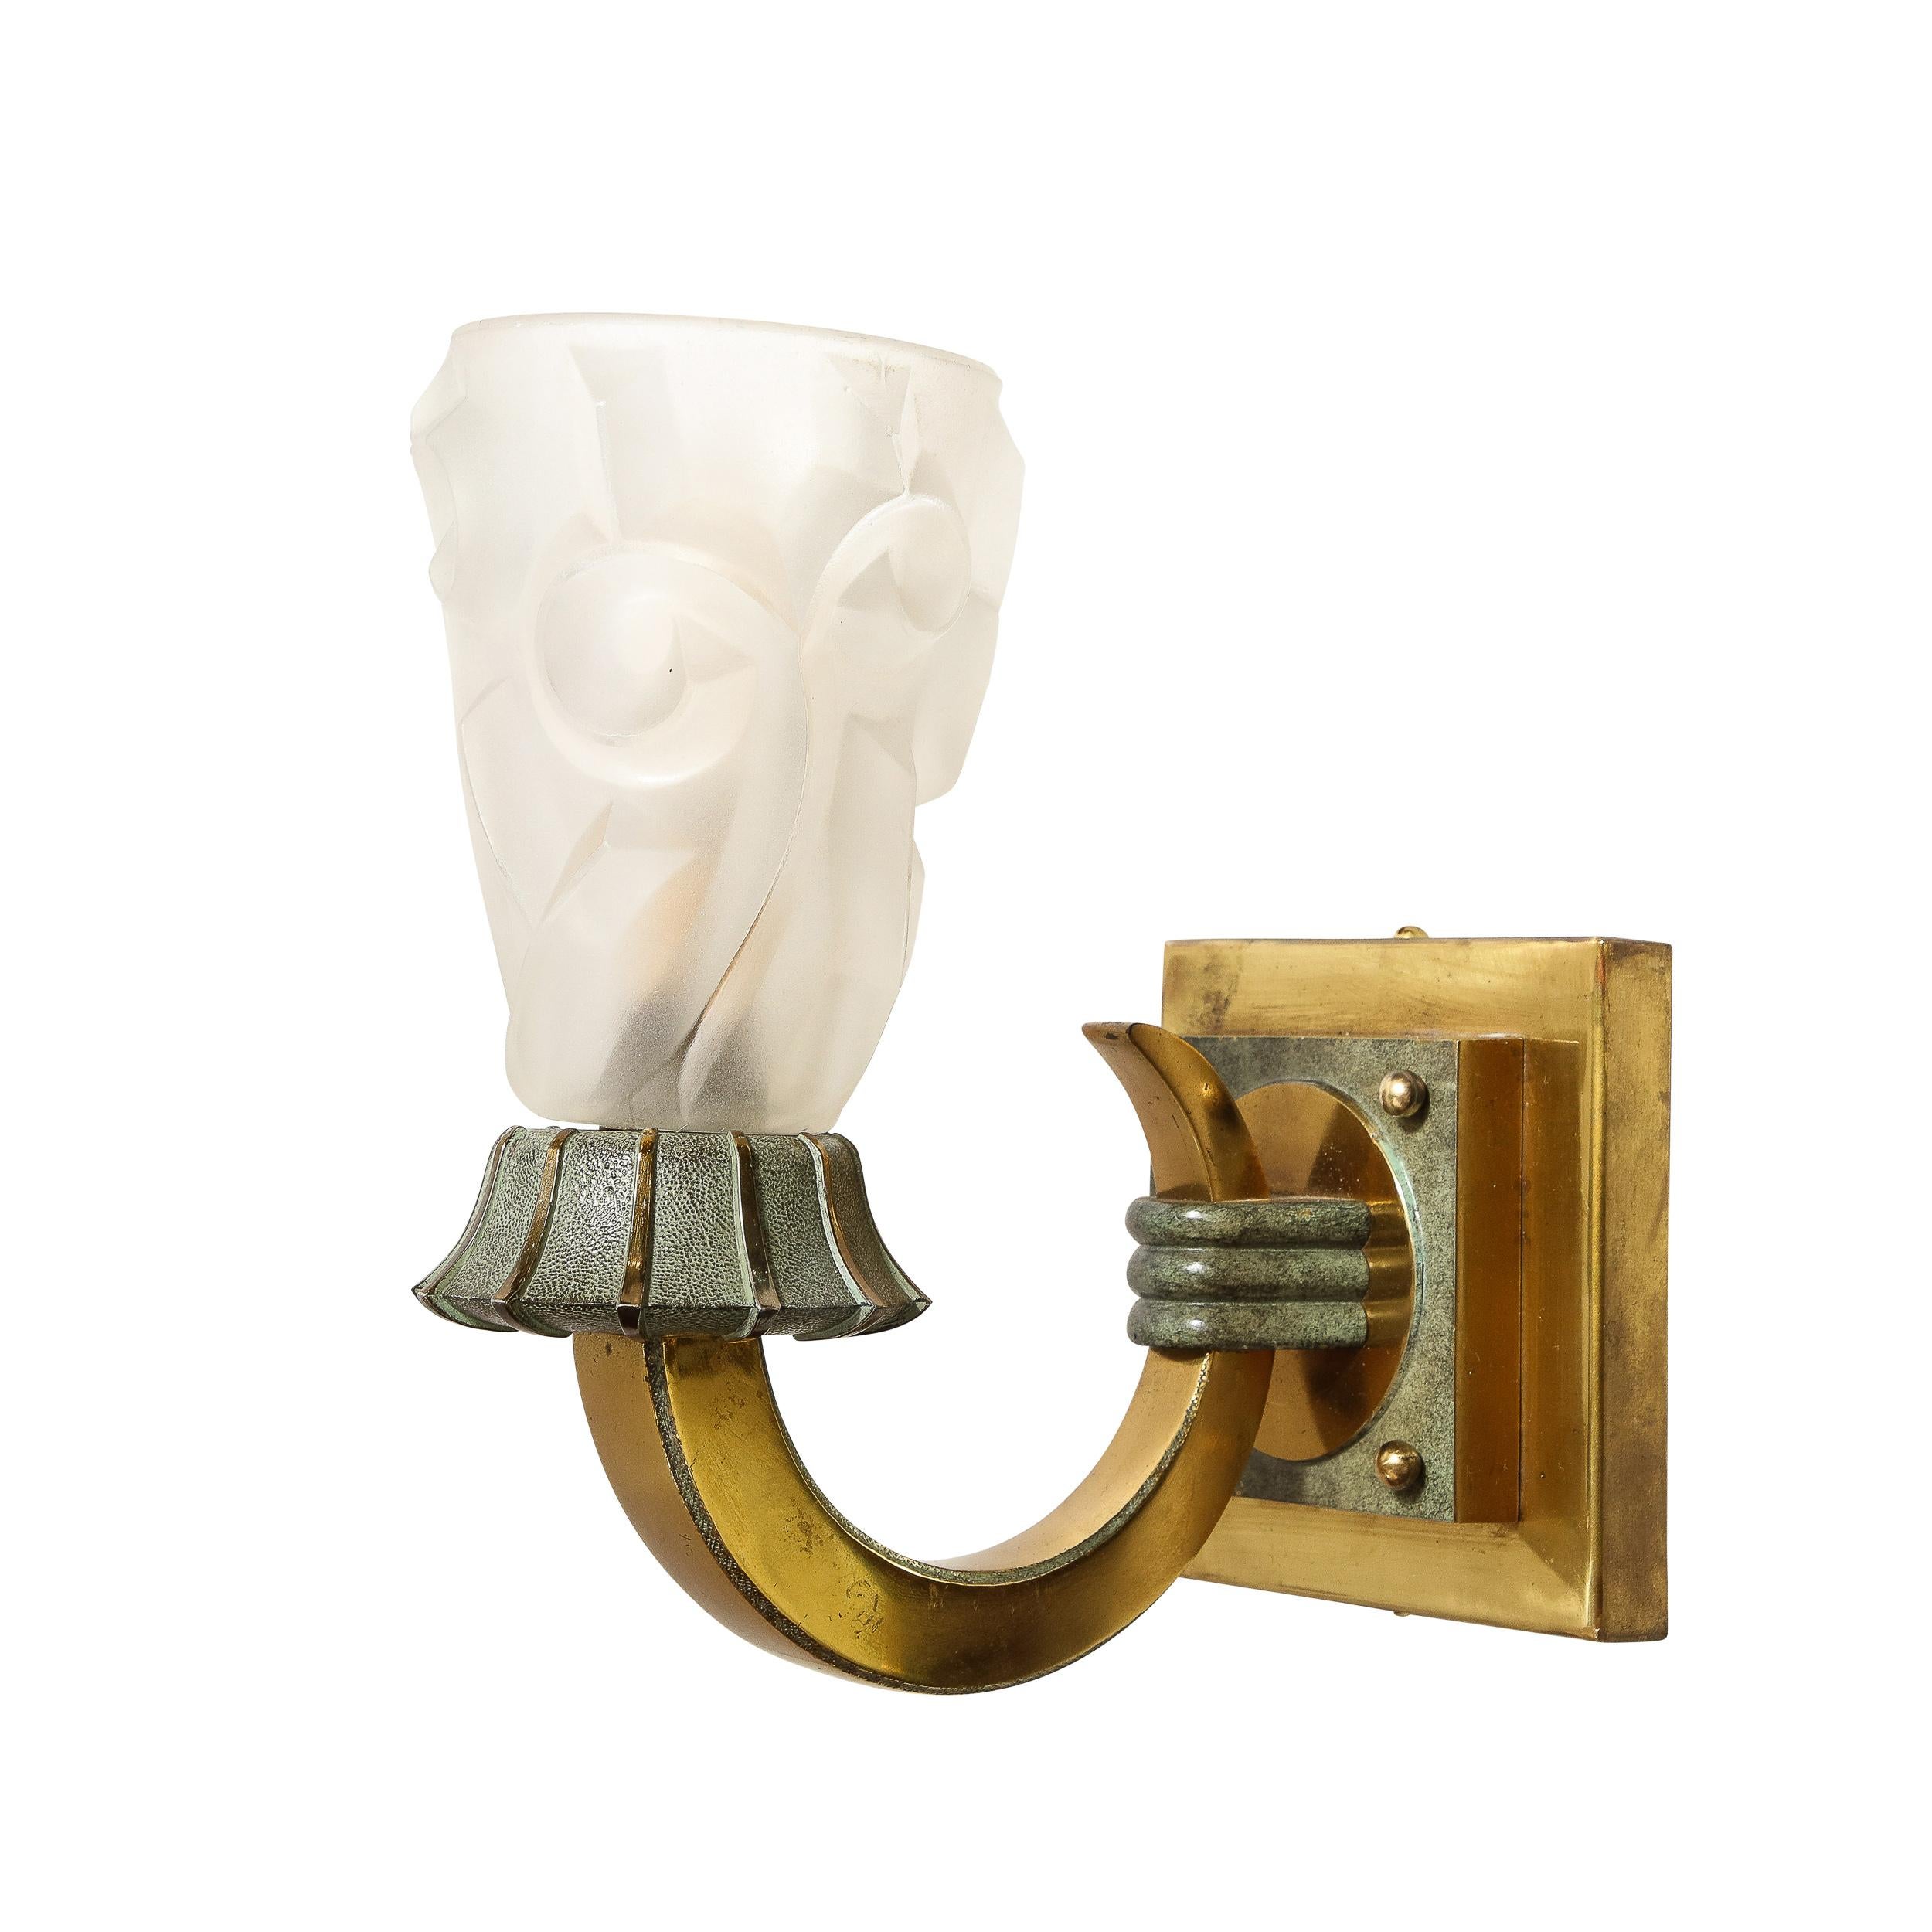 This uniquely charming pair of Art Deco Sconces in Polished Brass with Frosted Glass Shades is created by the company Degué, originating from France, Circa 1930. Featuring elegant curvatures and cubic sensibility, the sconces are framed in polished